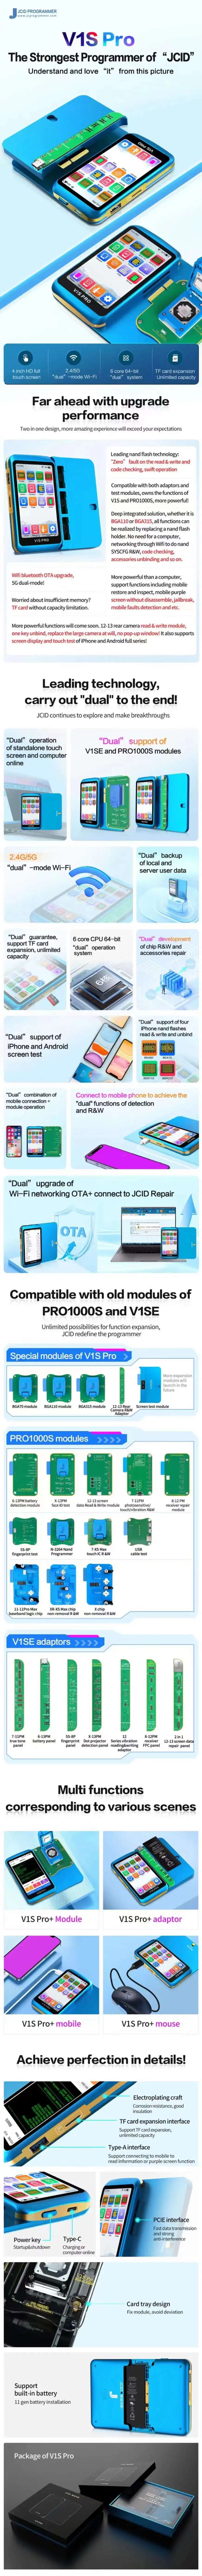 JCID JC V1S Pro Multifunction Programmer for iPhone Android Mobile Phone Repair Tools Compatible with V1SE & PRO1000S Modules